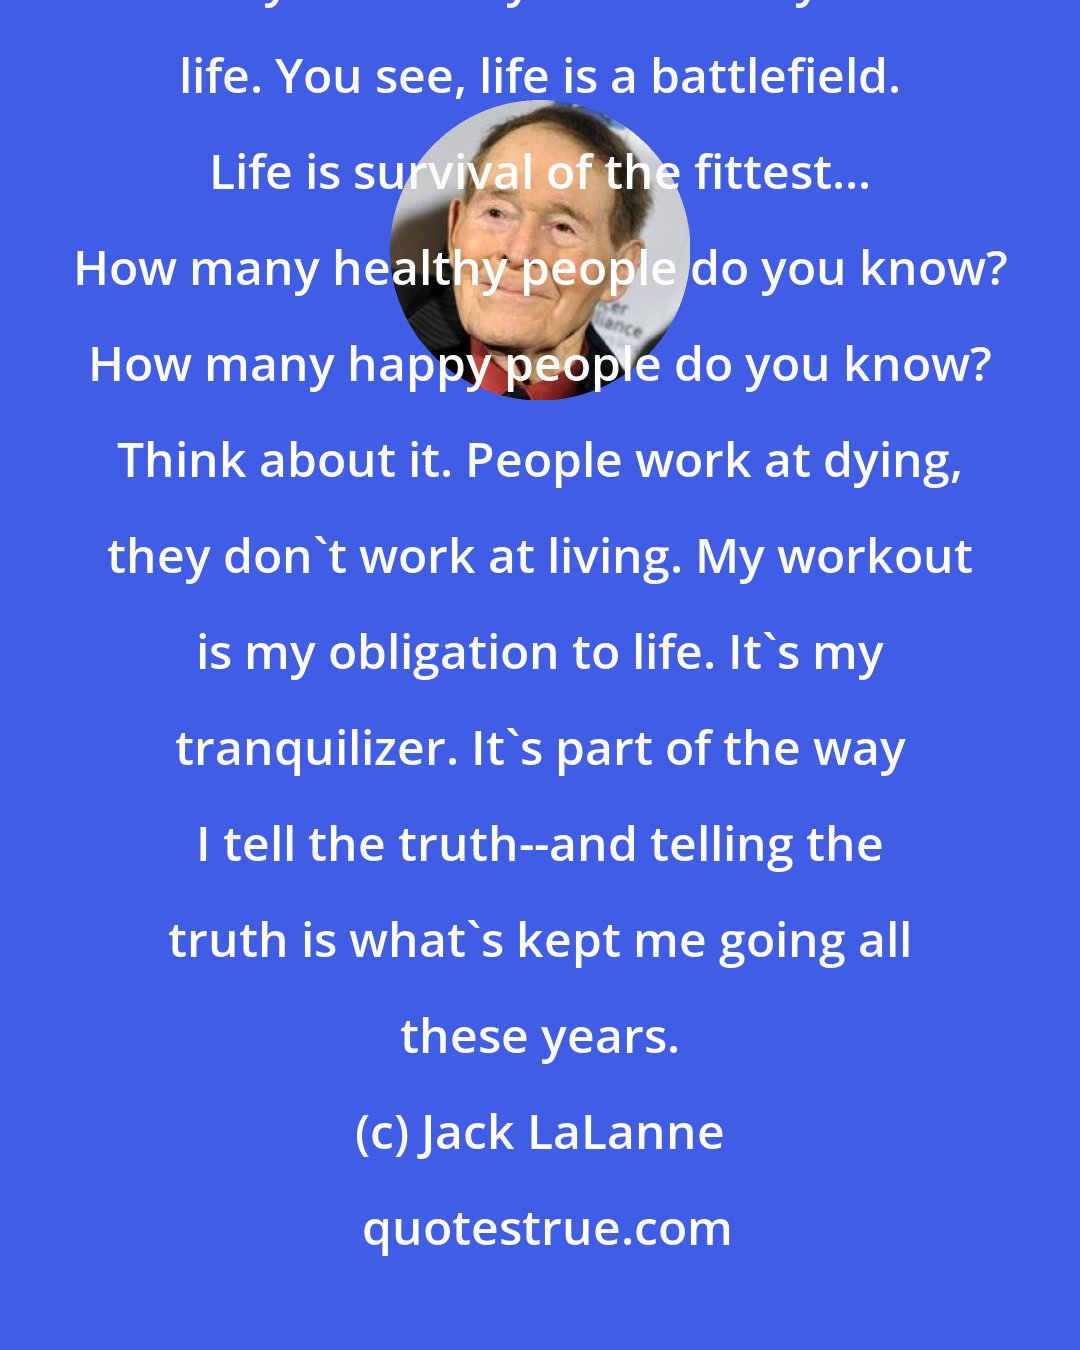 Jack LaLanne: I train like I'm training for the Olympics or for a Mr. America contest, the way I've always trained my whole life. You see, life is a battlefield. Life is survival of the fittest... How many healthy people do you know? How many happy people do you know? Think about it. People work at dying, they don't work at living. My workout is my obligation to life. It's my tranquilizer. It's part of the way I tell the truth--and telling the truth is what's kept me going all these years.